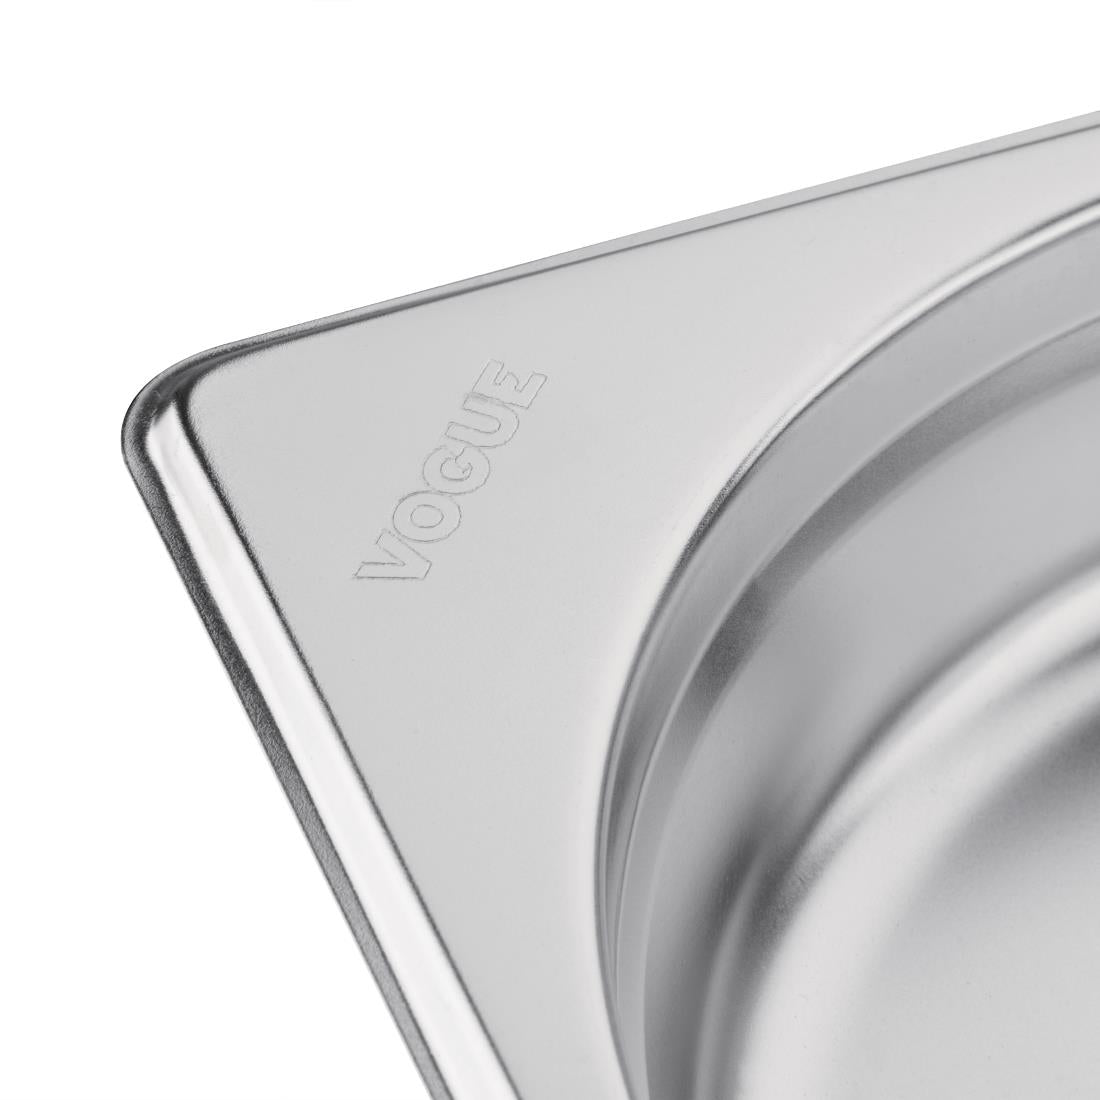 Vogue Stainless Steel 1/9 Gastronorm Pan 100mm